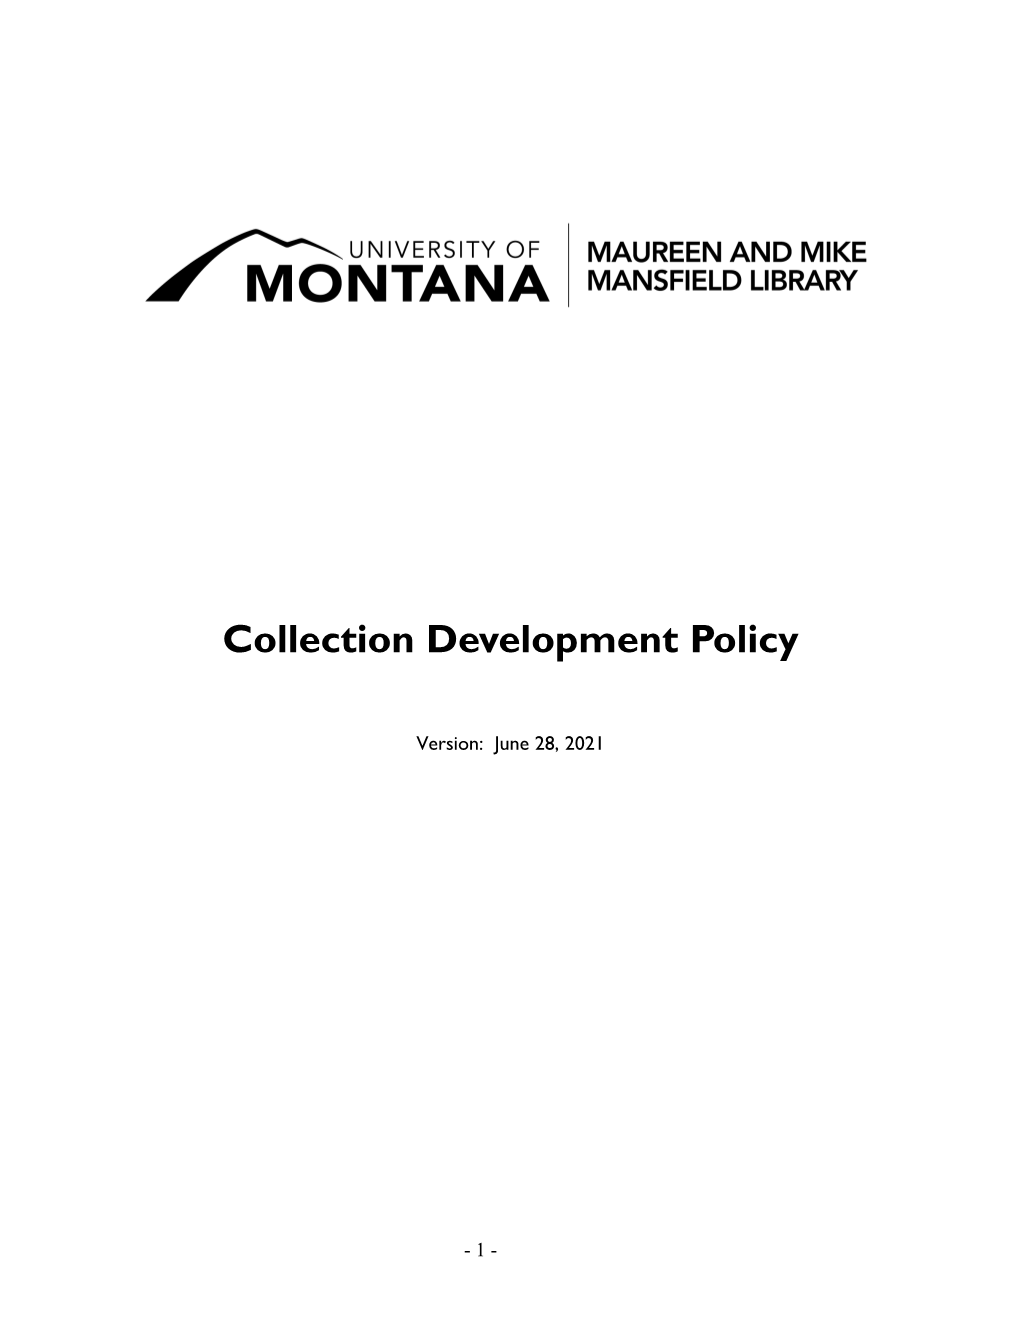 Maureen and Mike Mansfield Library Collection Development Policy